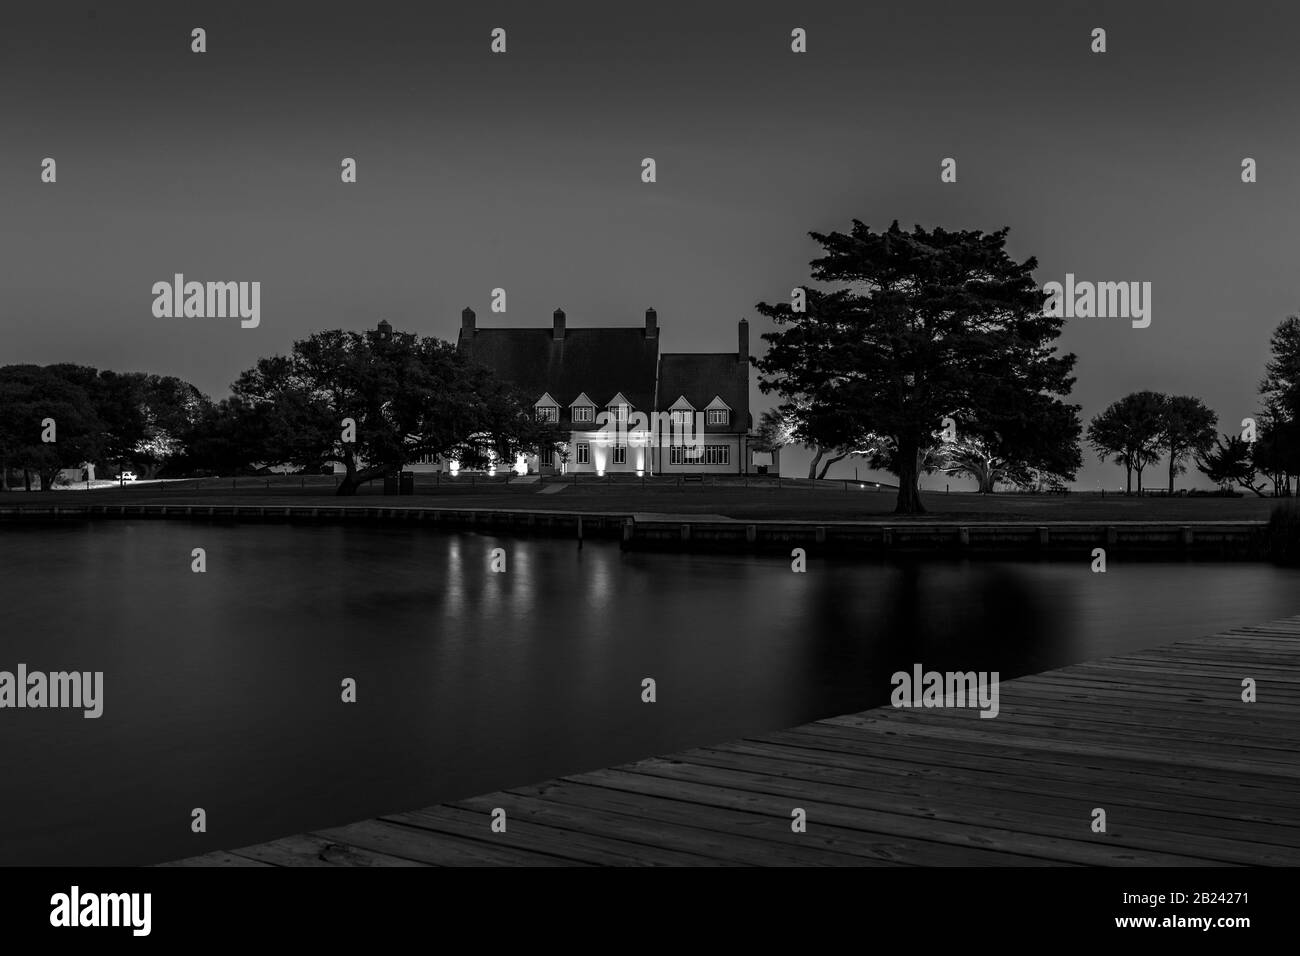 Black & white of The Outer Banks Whalehead Club at night, Corolla, NC, May 29, 2013 Stock Photo